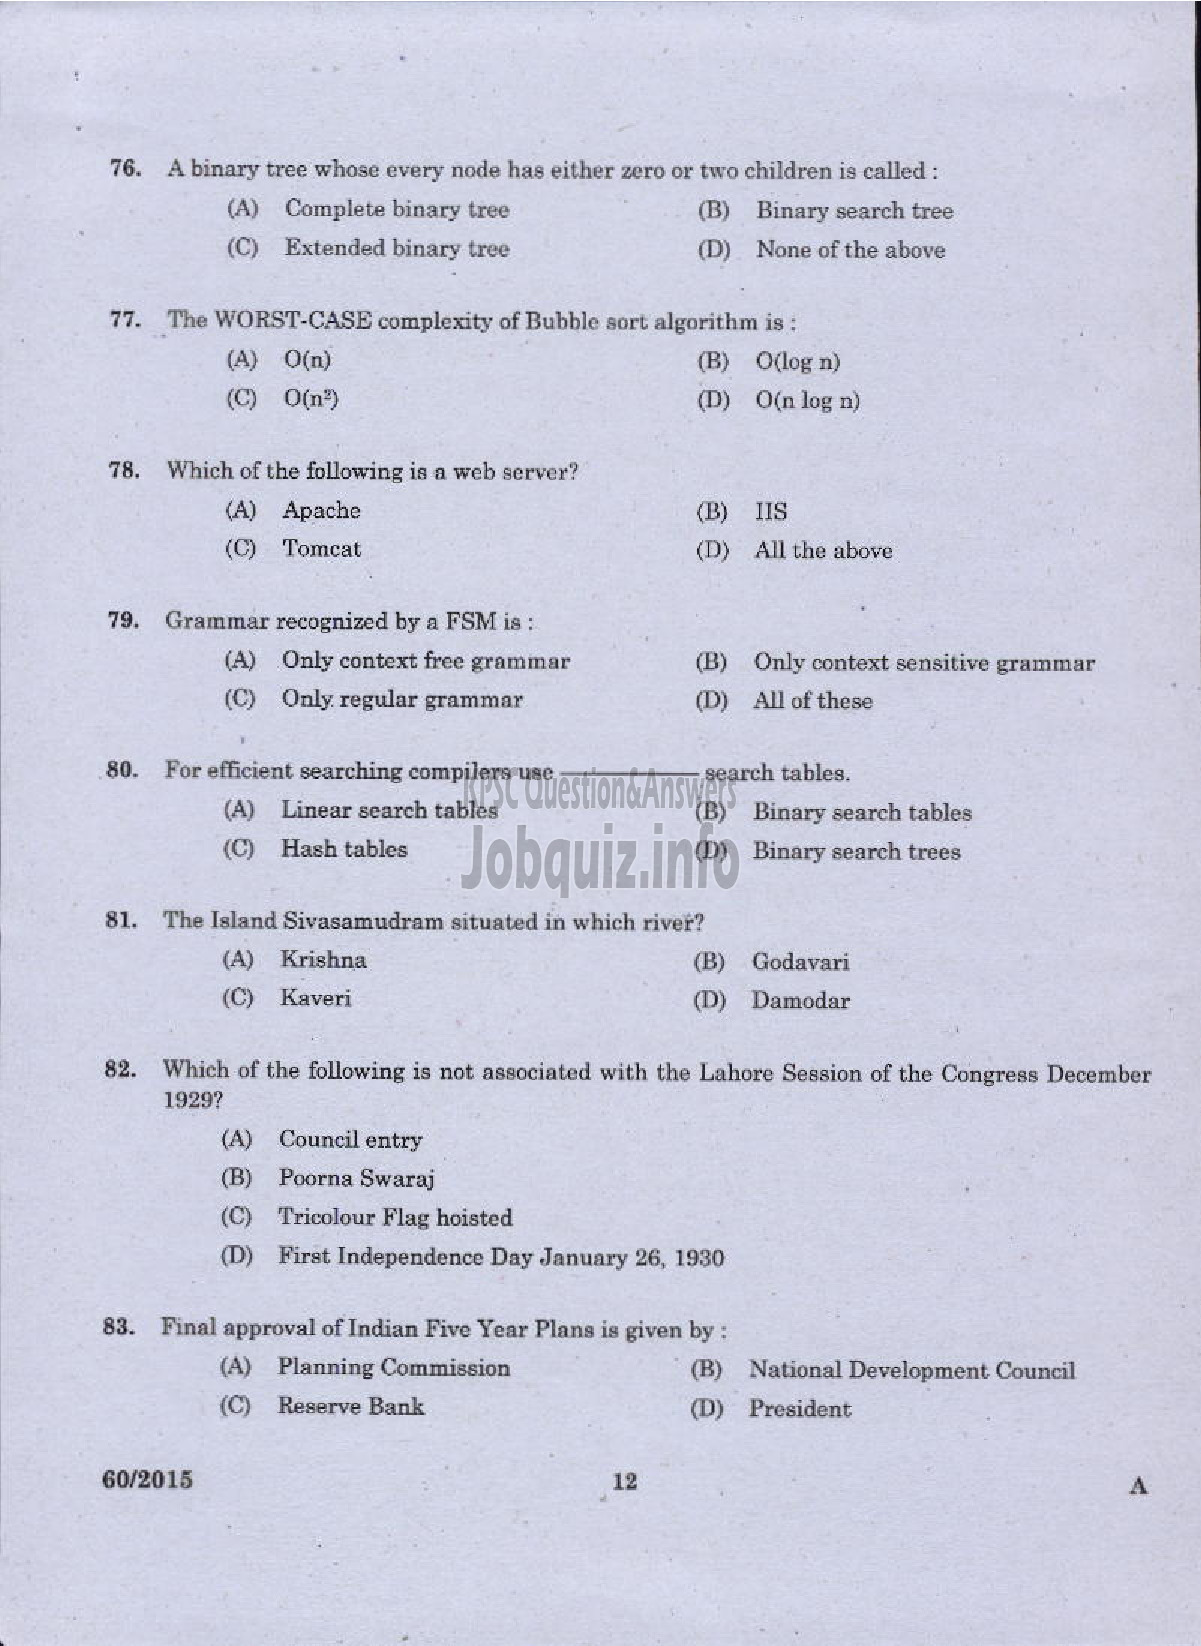 Kerala PSC Question Paper - COMPUTER PROGRAMMER TECHNICAL EDUCATION ENGINEERING COLLEGES-10